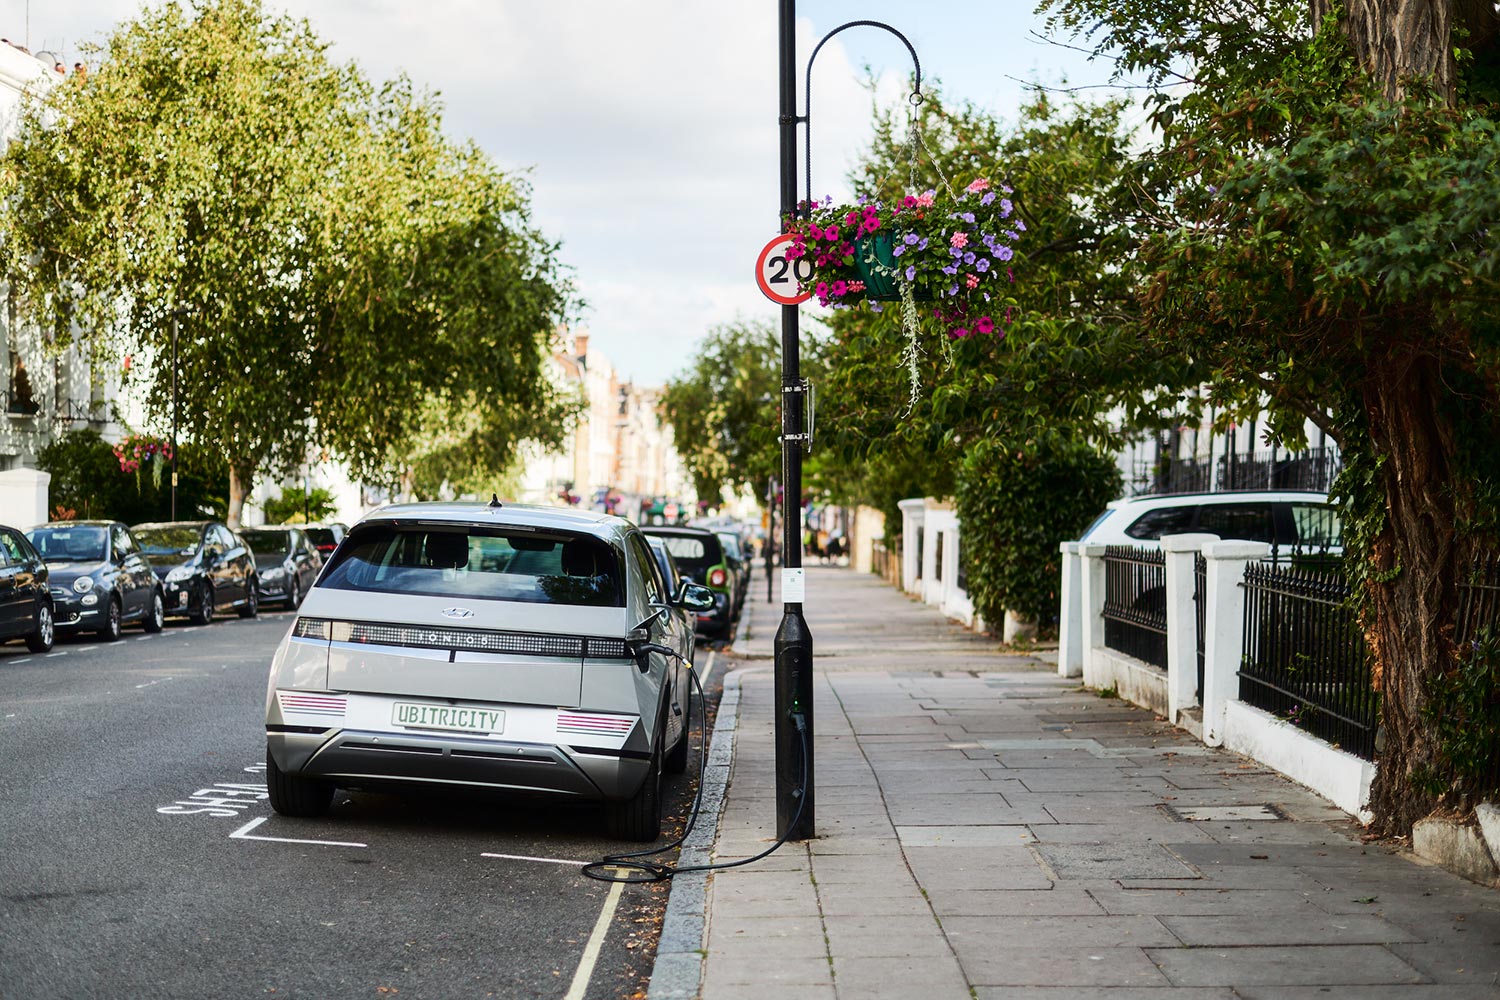 On-street public chargepoints is one solution to make EV charging accessible for those unable to charge at home. Image: ubitricity